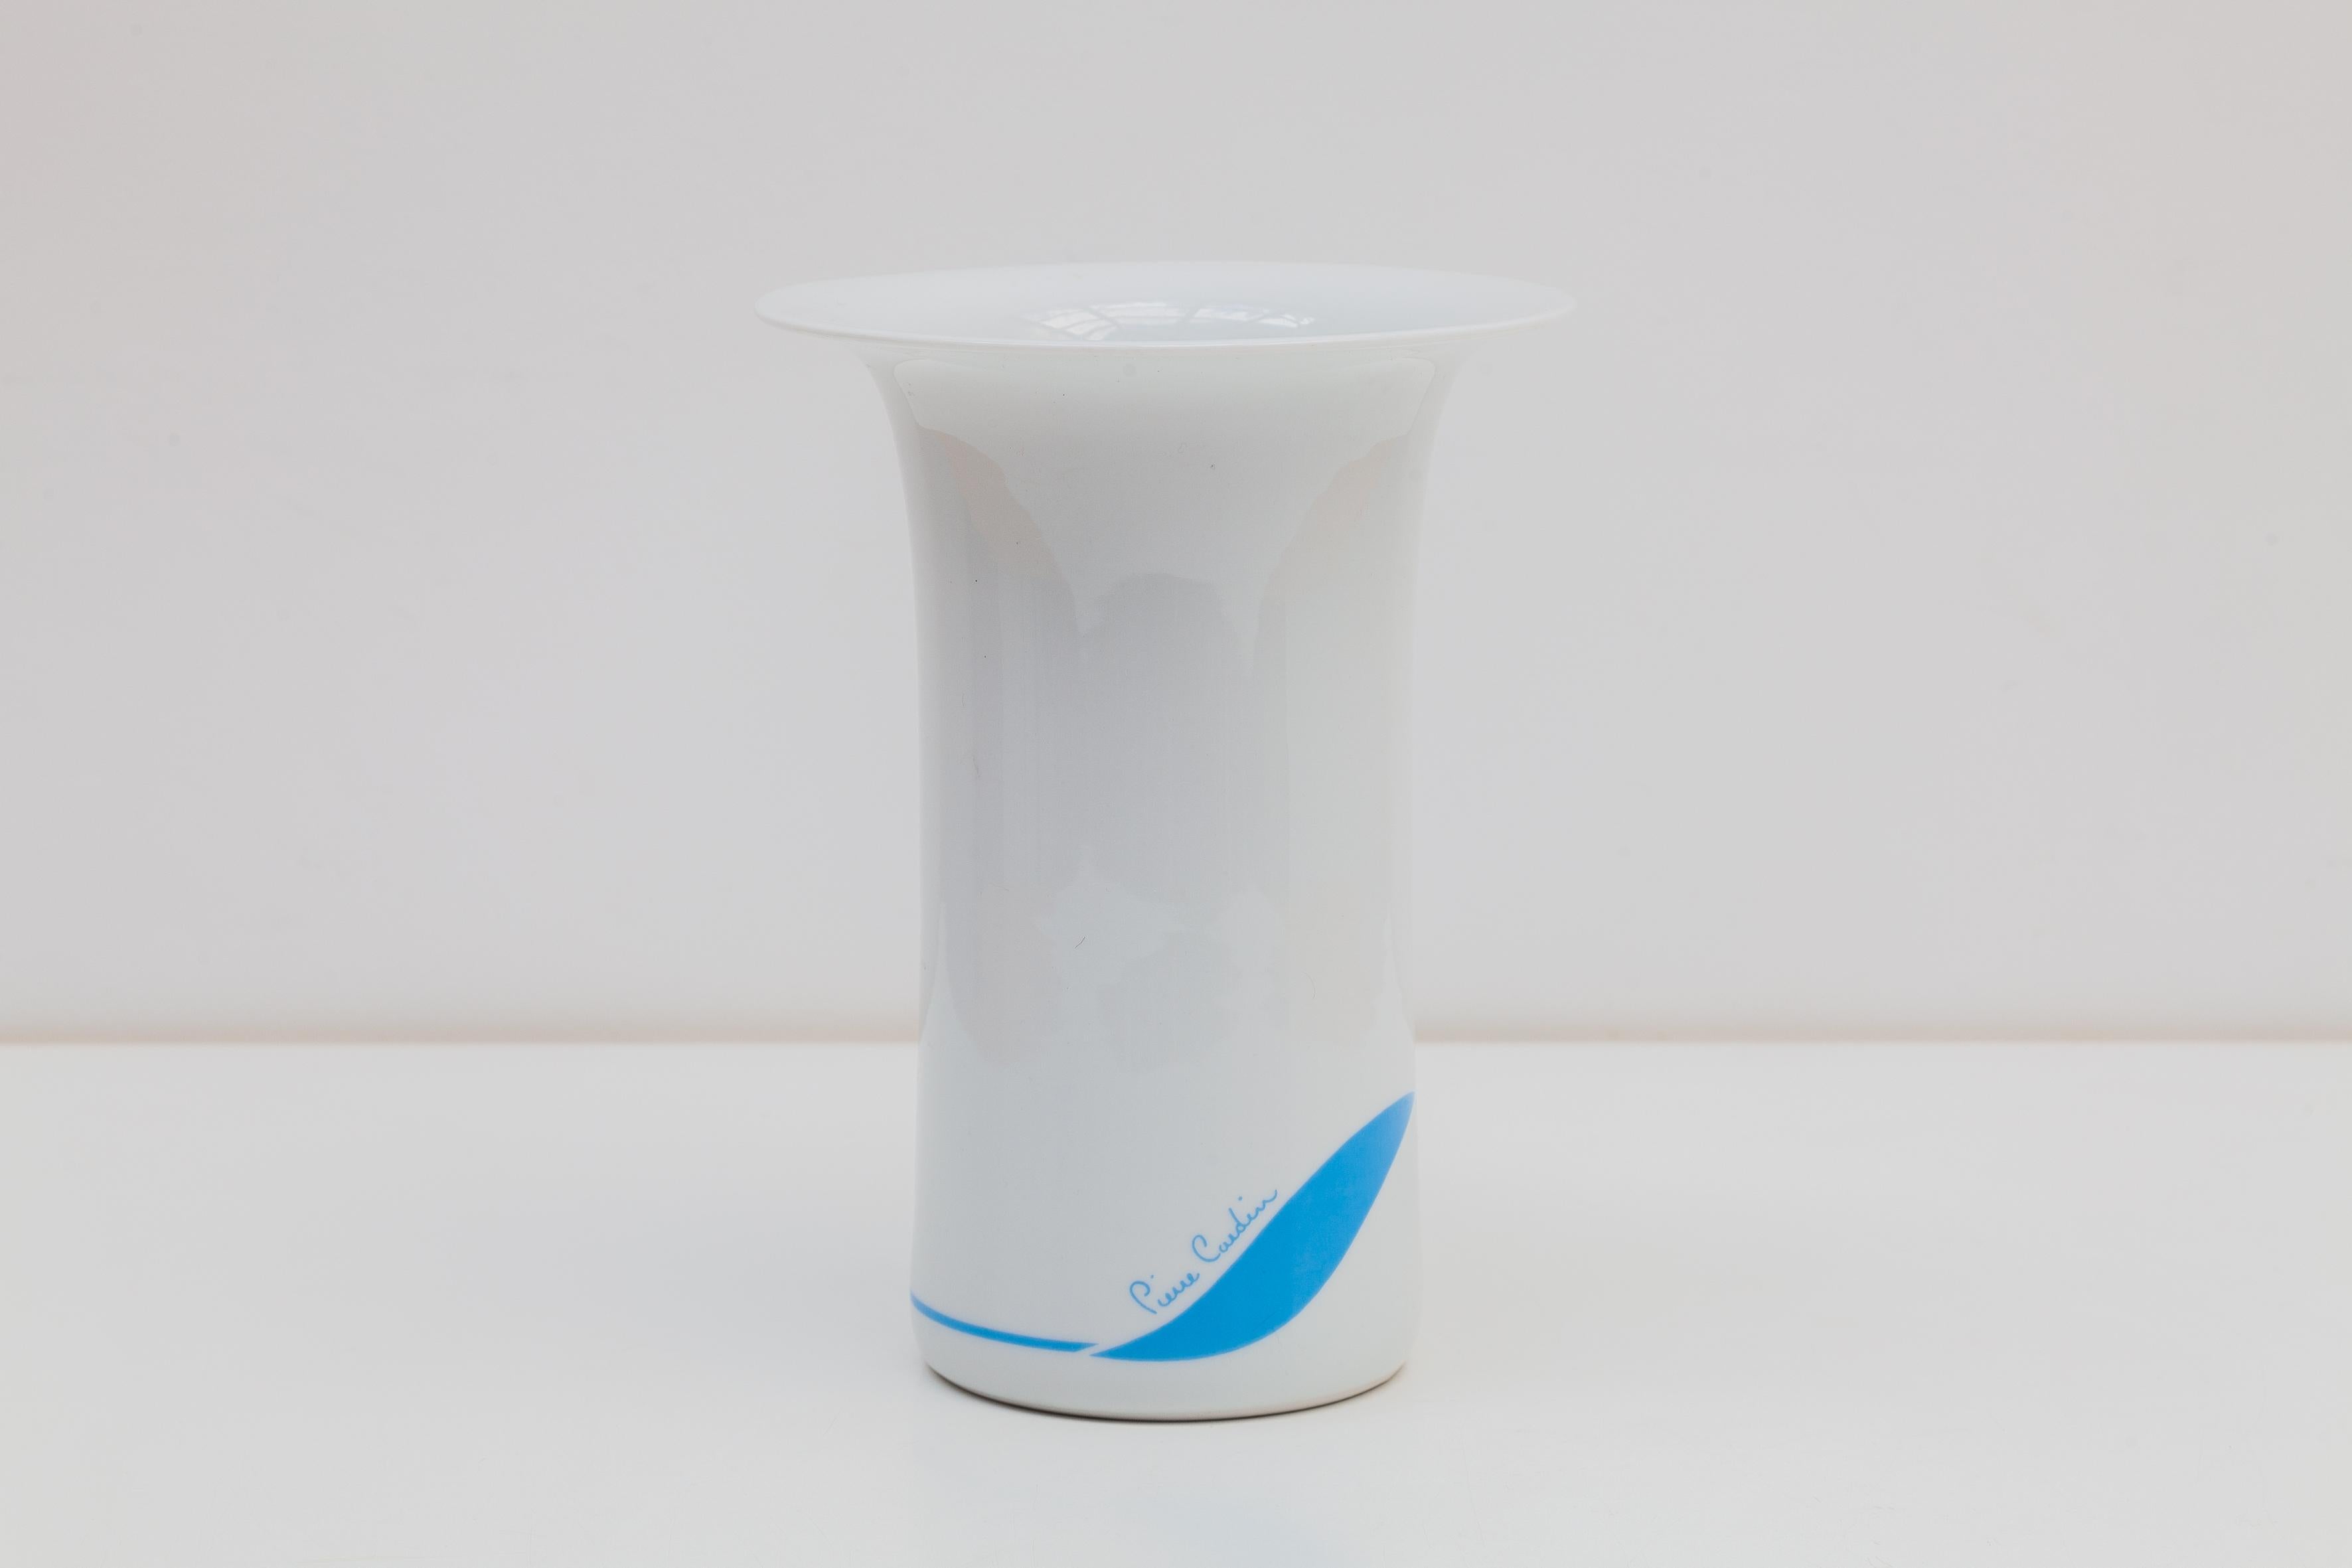 Beautiful flower vase made in white cylindrical porcelain, designed by Pierre Paulin, also with a logo on the vase, which is consistently applied to all his ceramiques of this setting. Also made in red, 1960s, France.
Beautiful proportions, sober